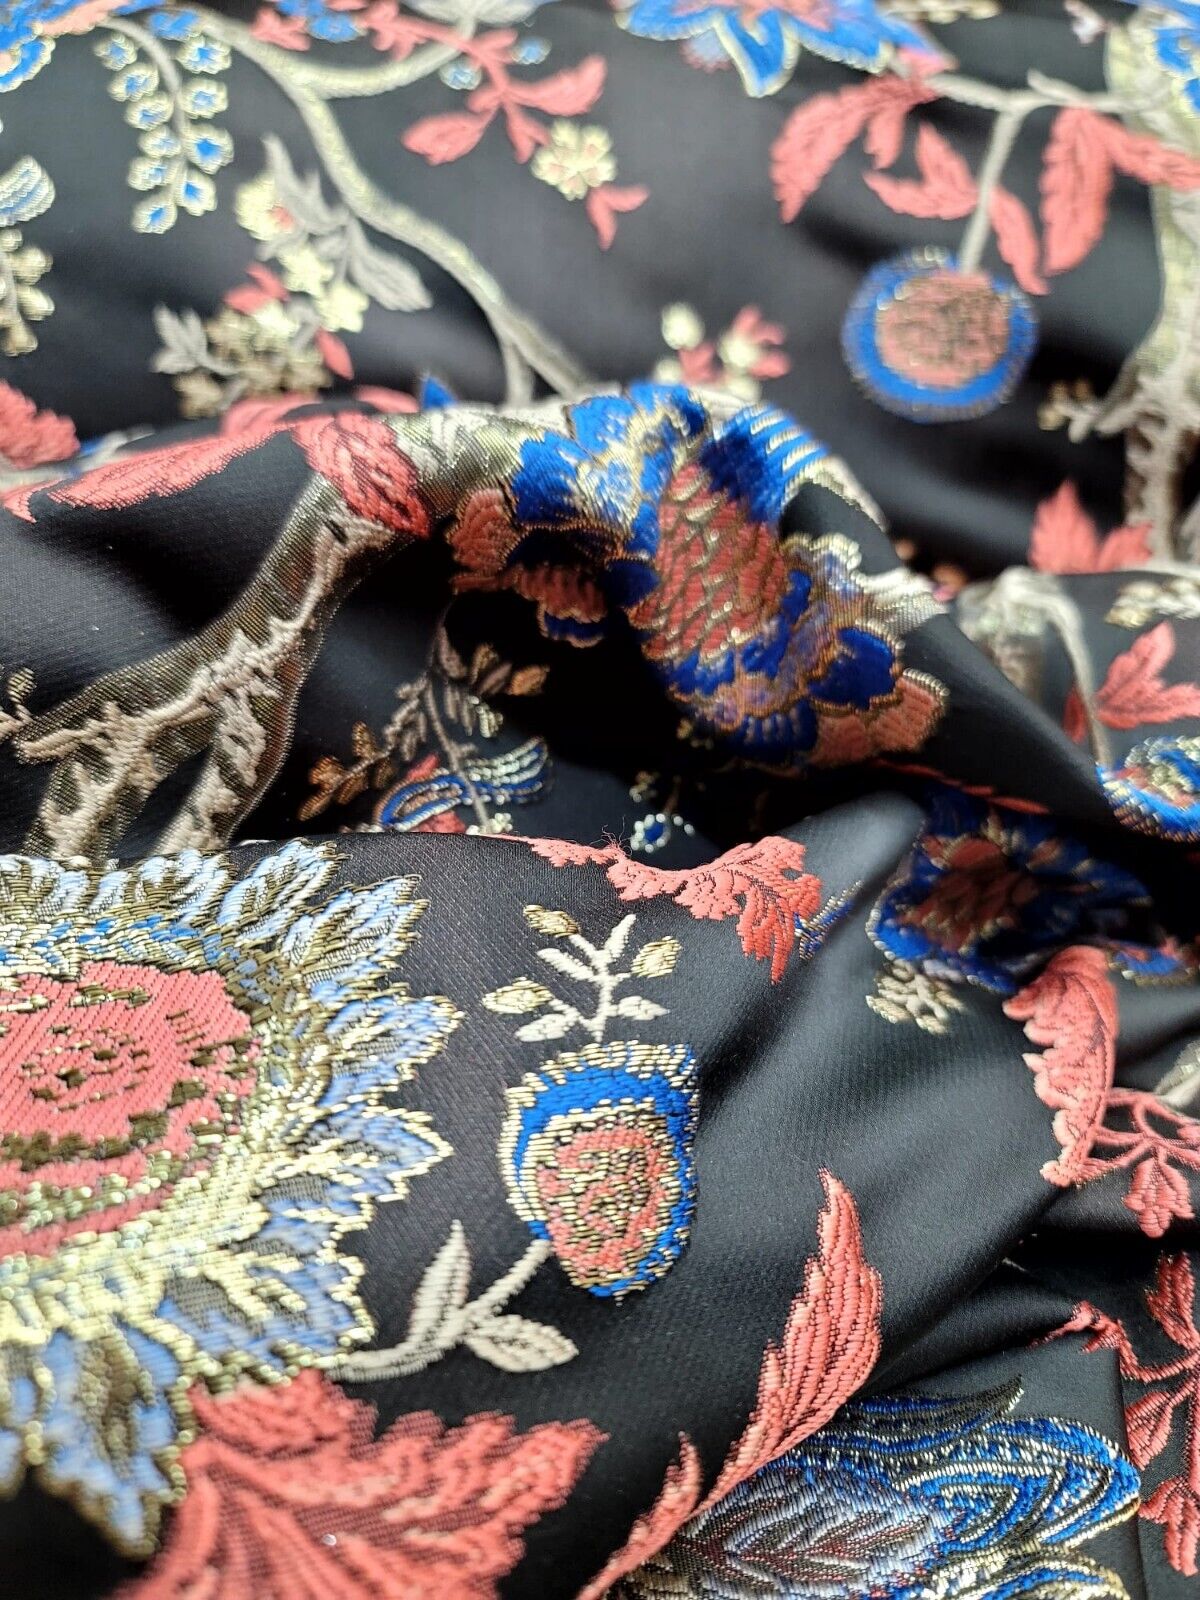 Coral Blue Floral Damask Jacquard Brocade Fabric By The Yard Thick Unique Design